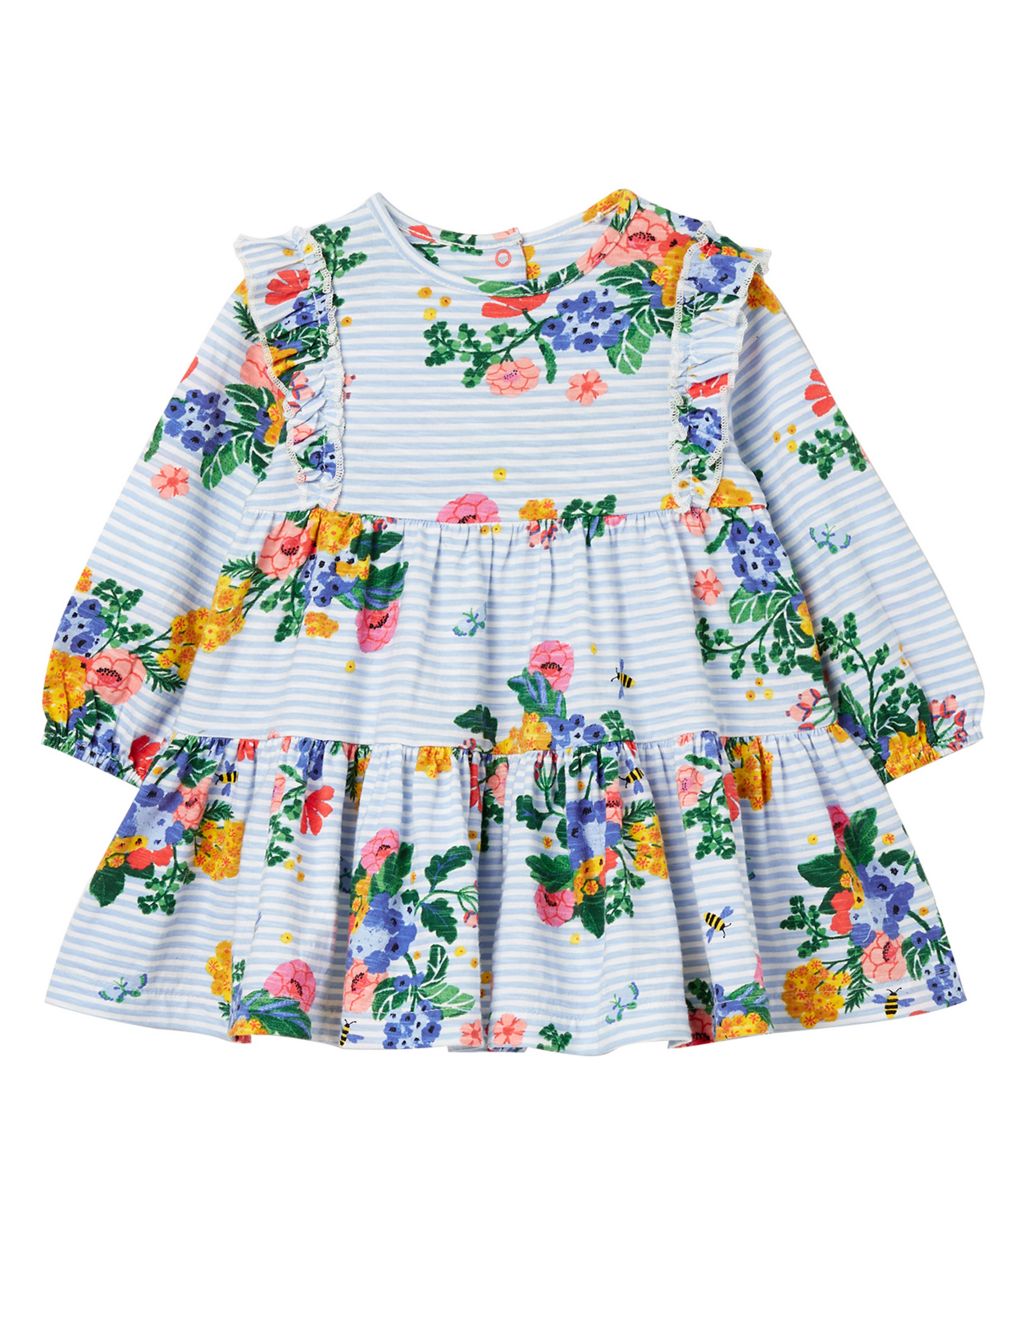 Pure Cotton Floral Striped Dress (0-3 Yrs) image 1